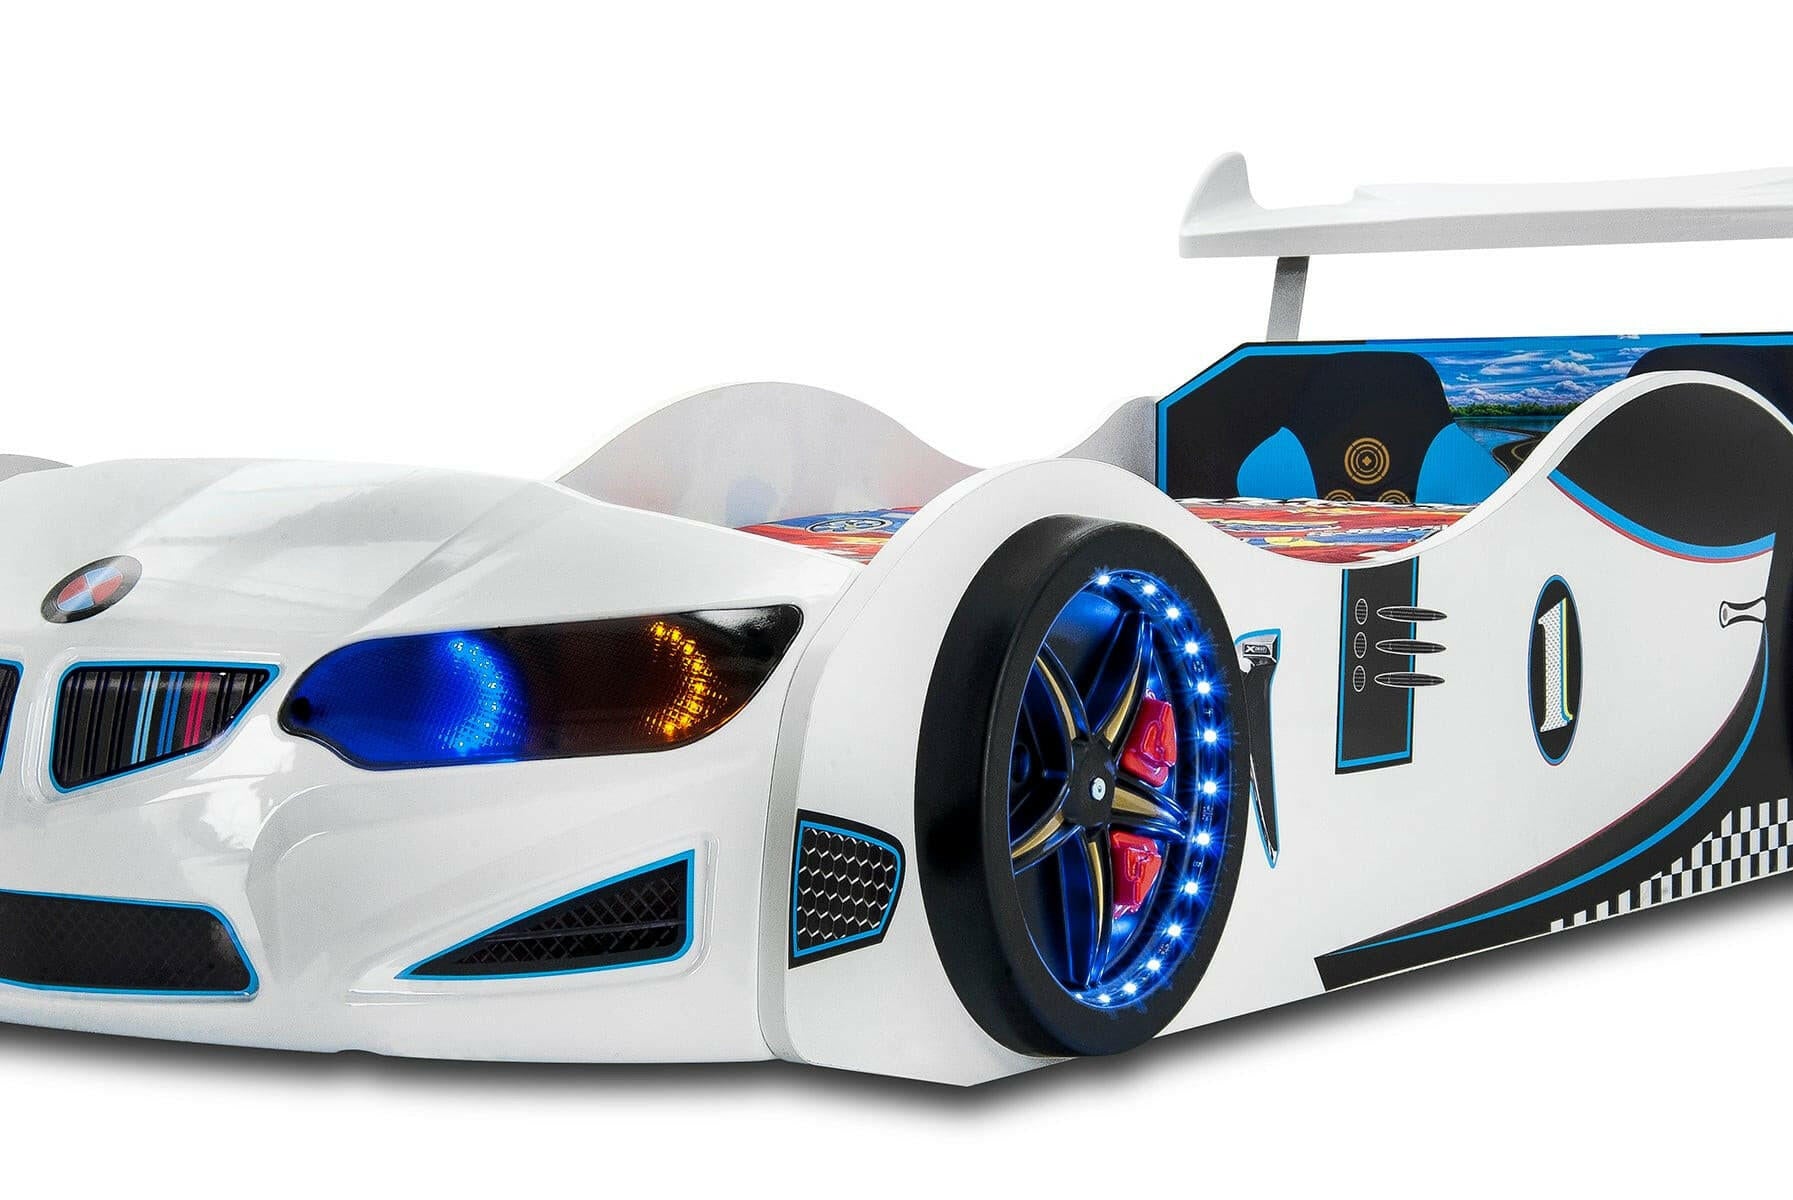 GT1 Kids Race Car Bed w/ LED Headlights Remote Control Toddler Twin Size Frame - Kids Eye Candy